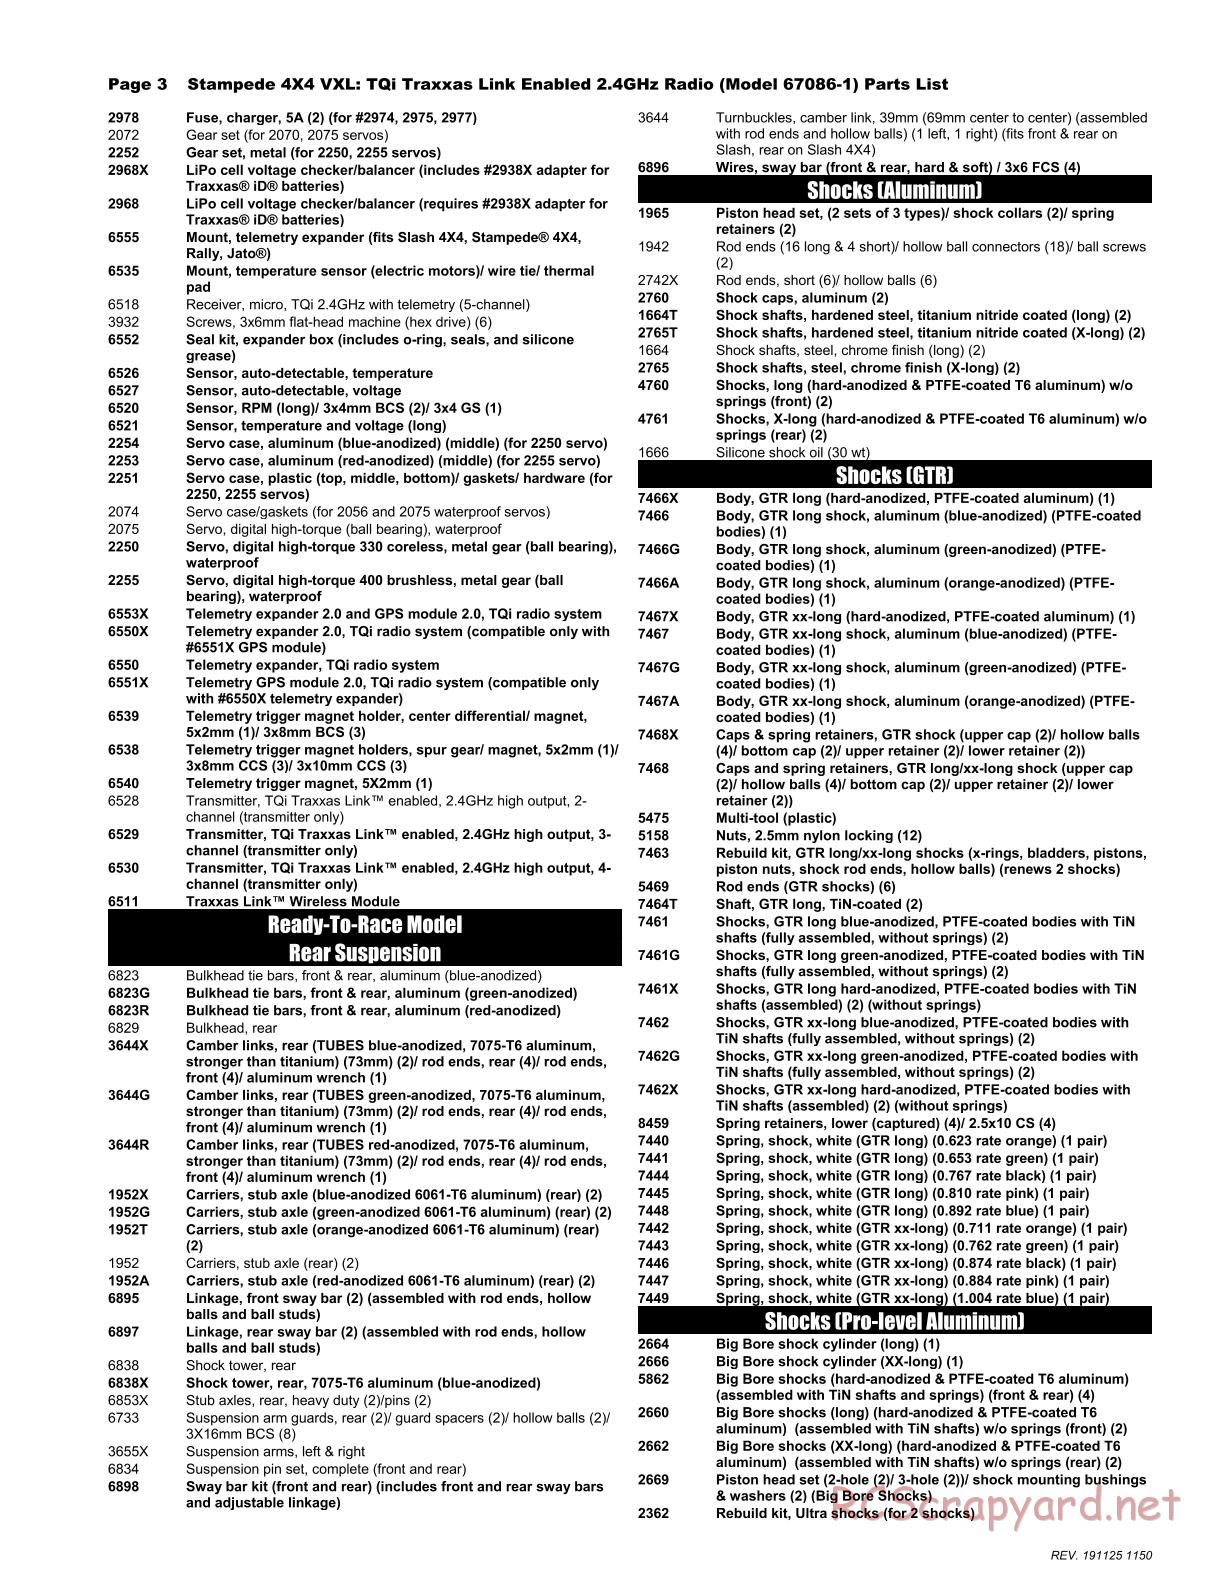 Traxxas - Stampede 4x4 VXL (2015) - Parts List - Page 3